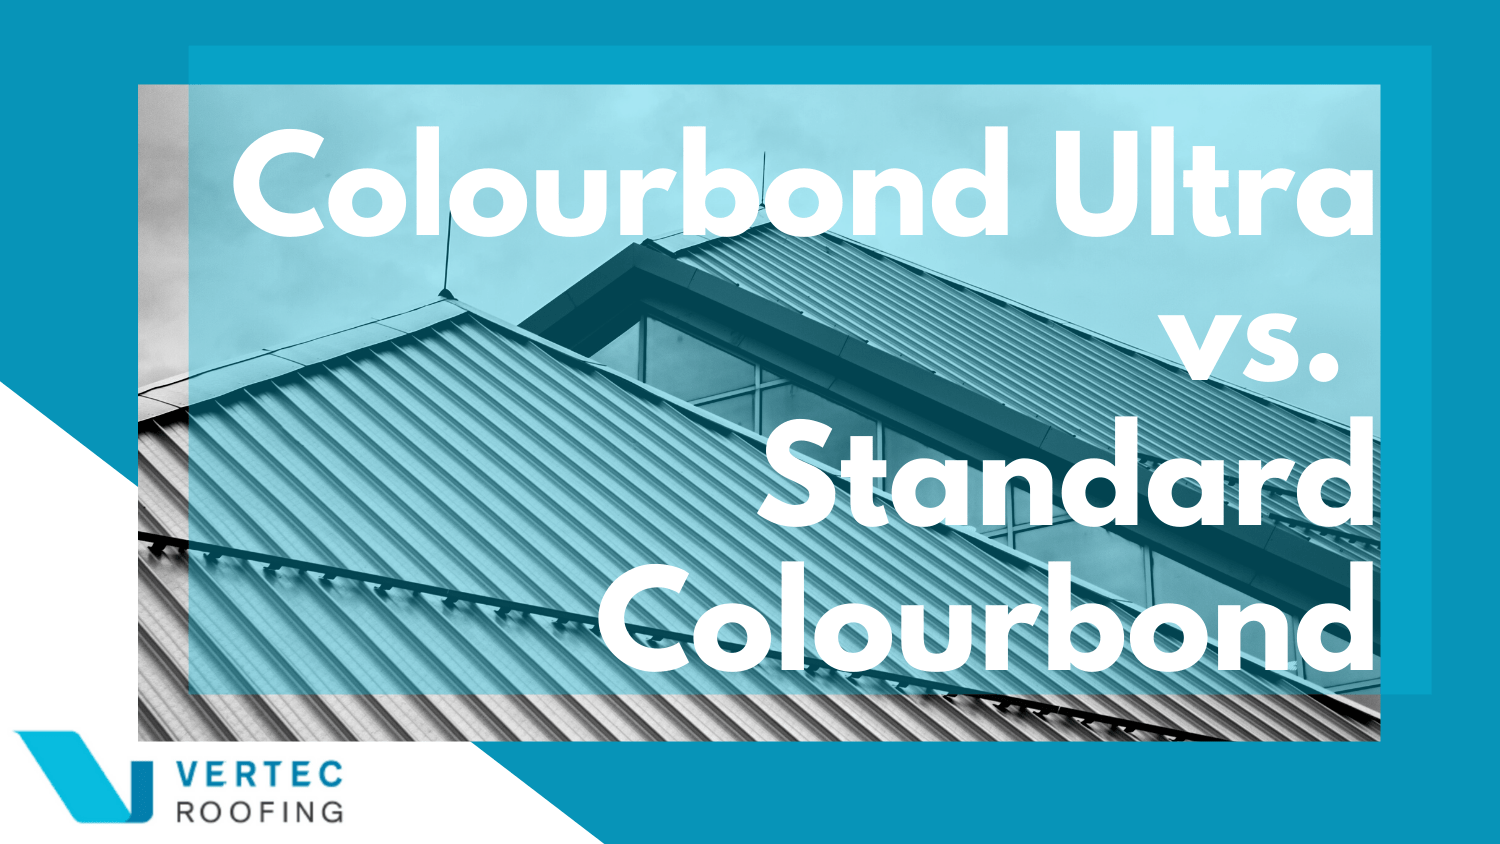 Colorbond Ultra vs Standard Colorbond: What's the Difference?